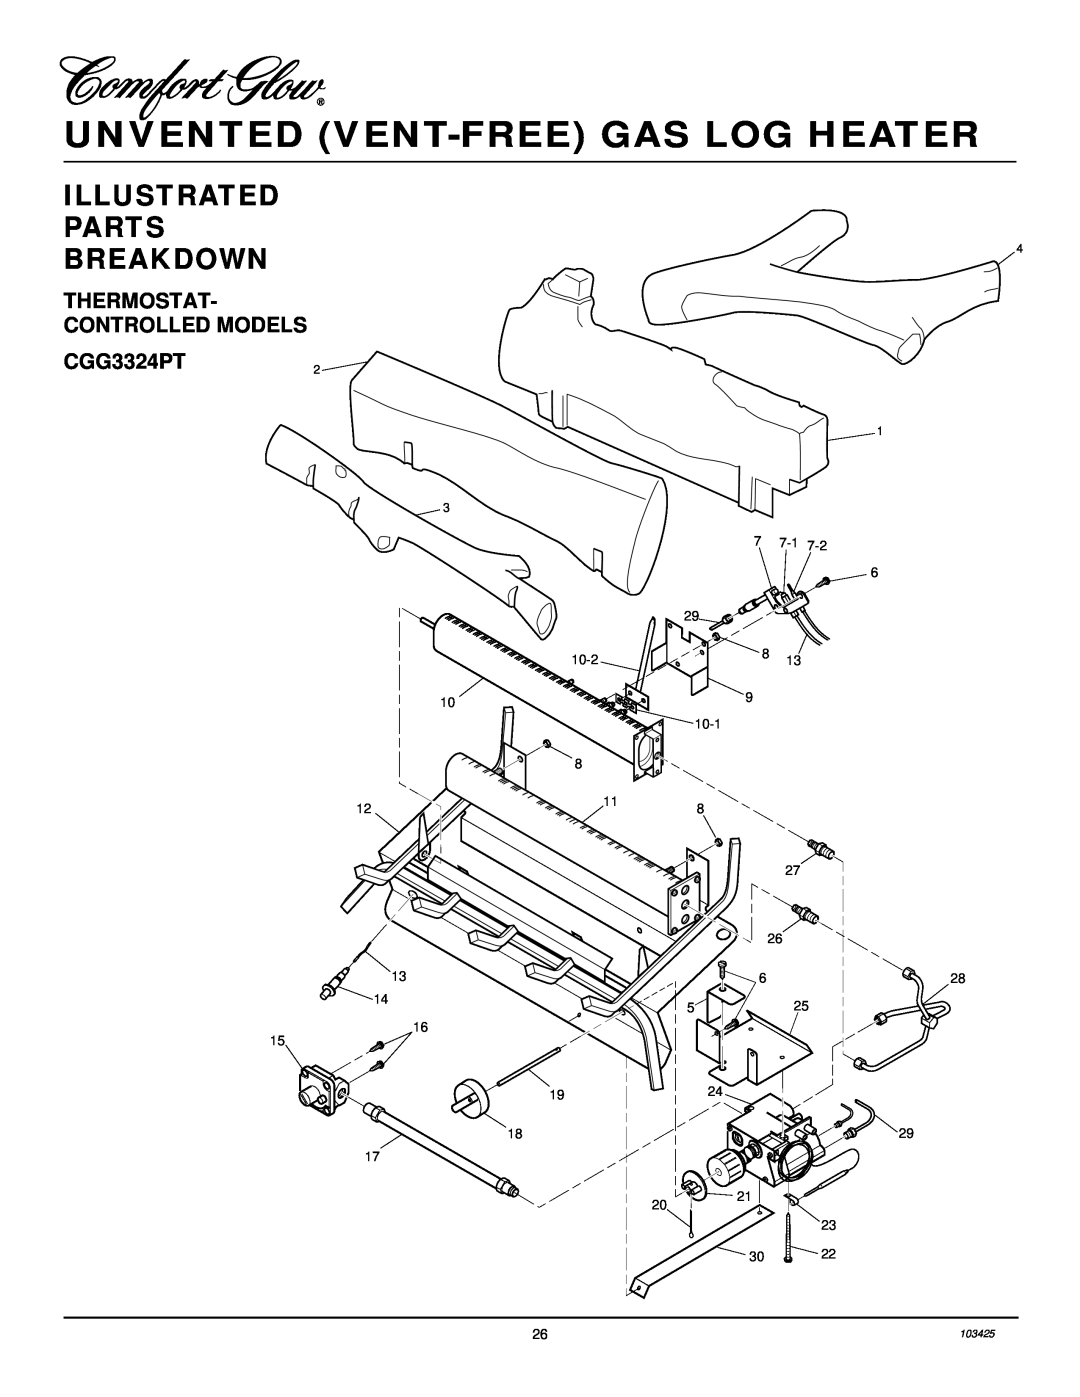 Desa Tech CGG3324PT Unvented Vent-Free Gas Log Heater, Illustrated Parts Breakdown, 10-2, 7 7-1, 10-1, 628 525, 103425 